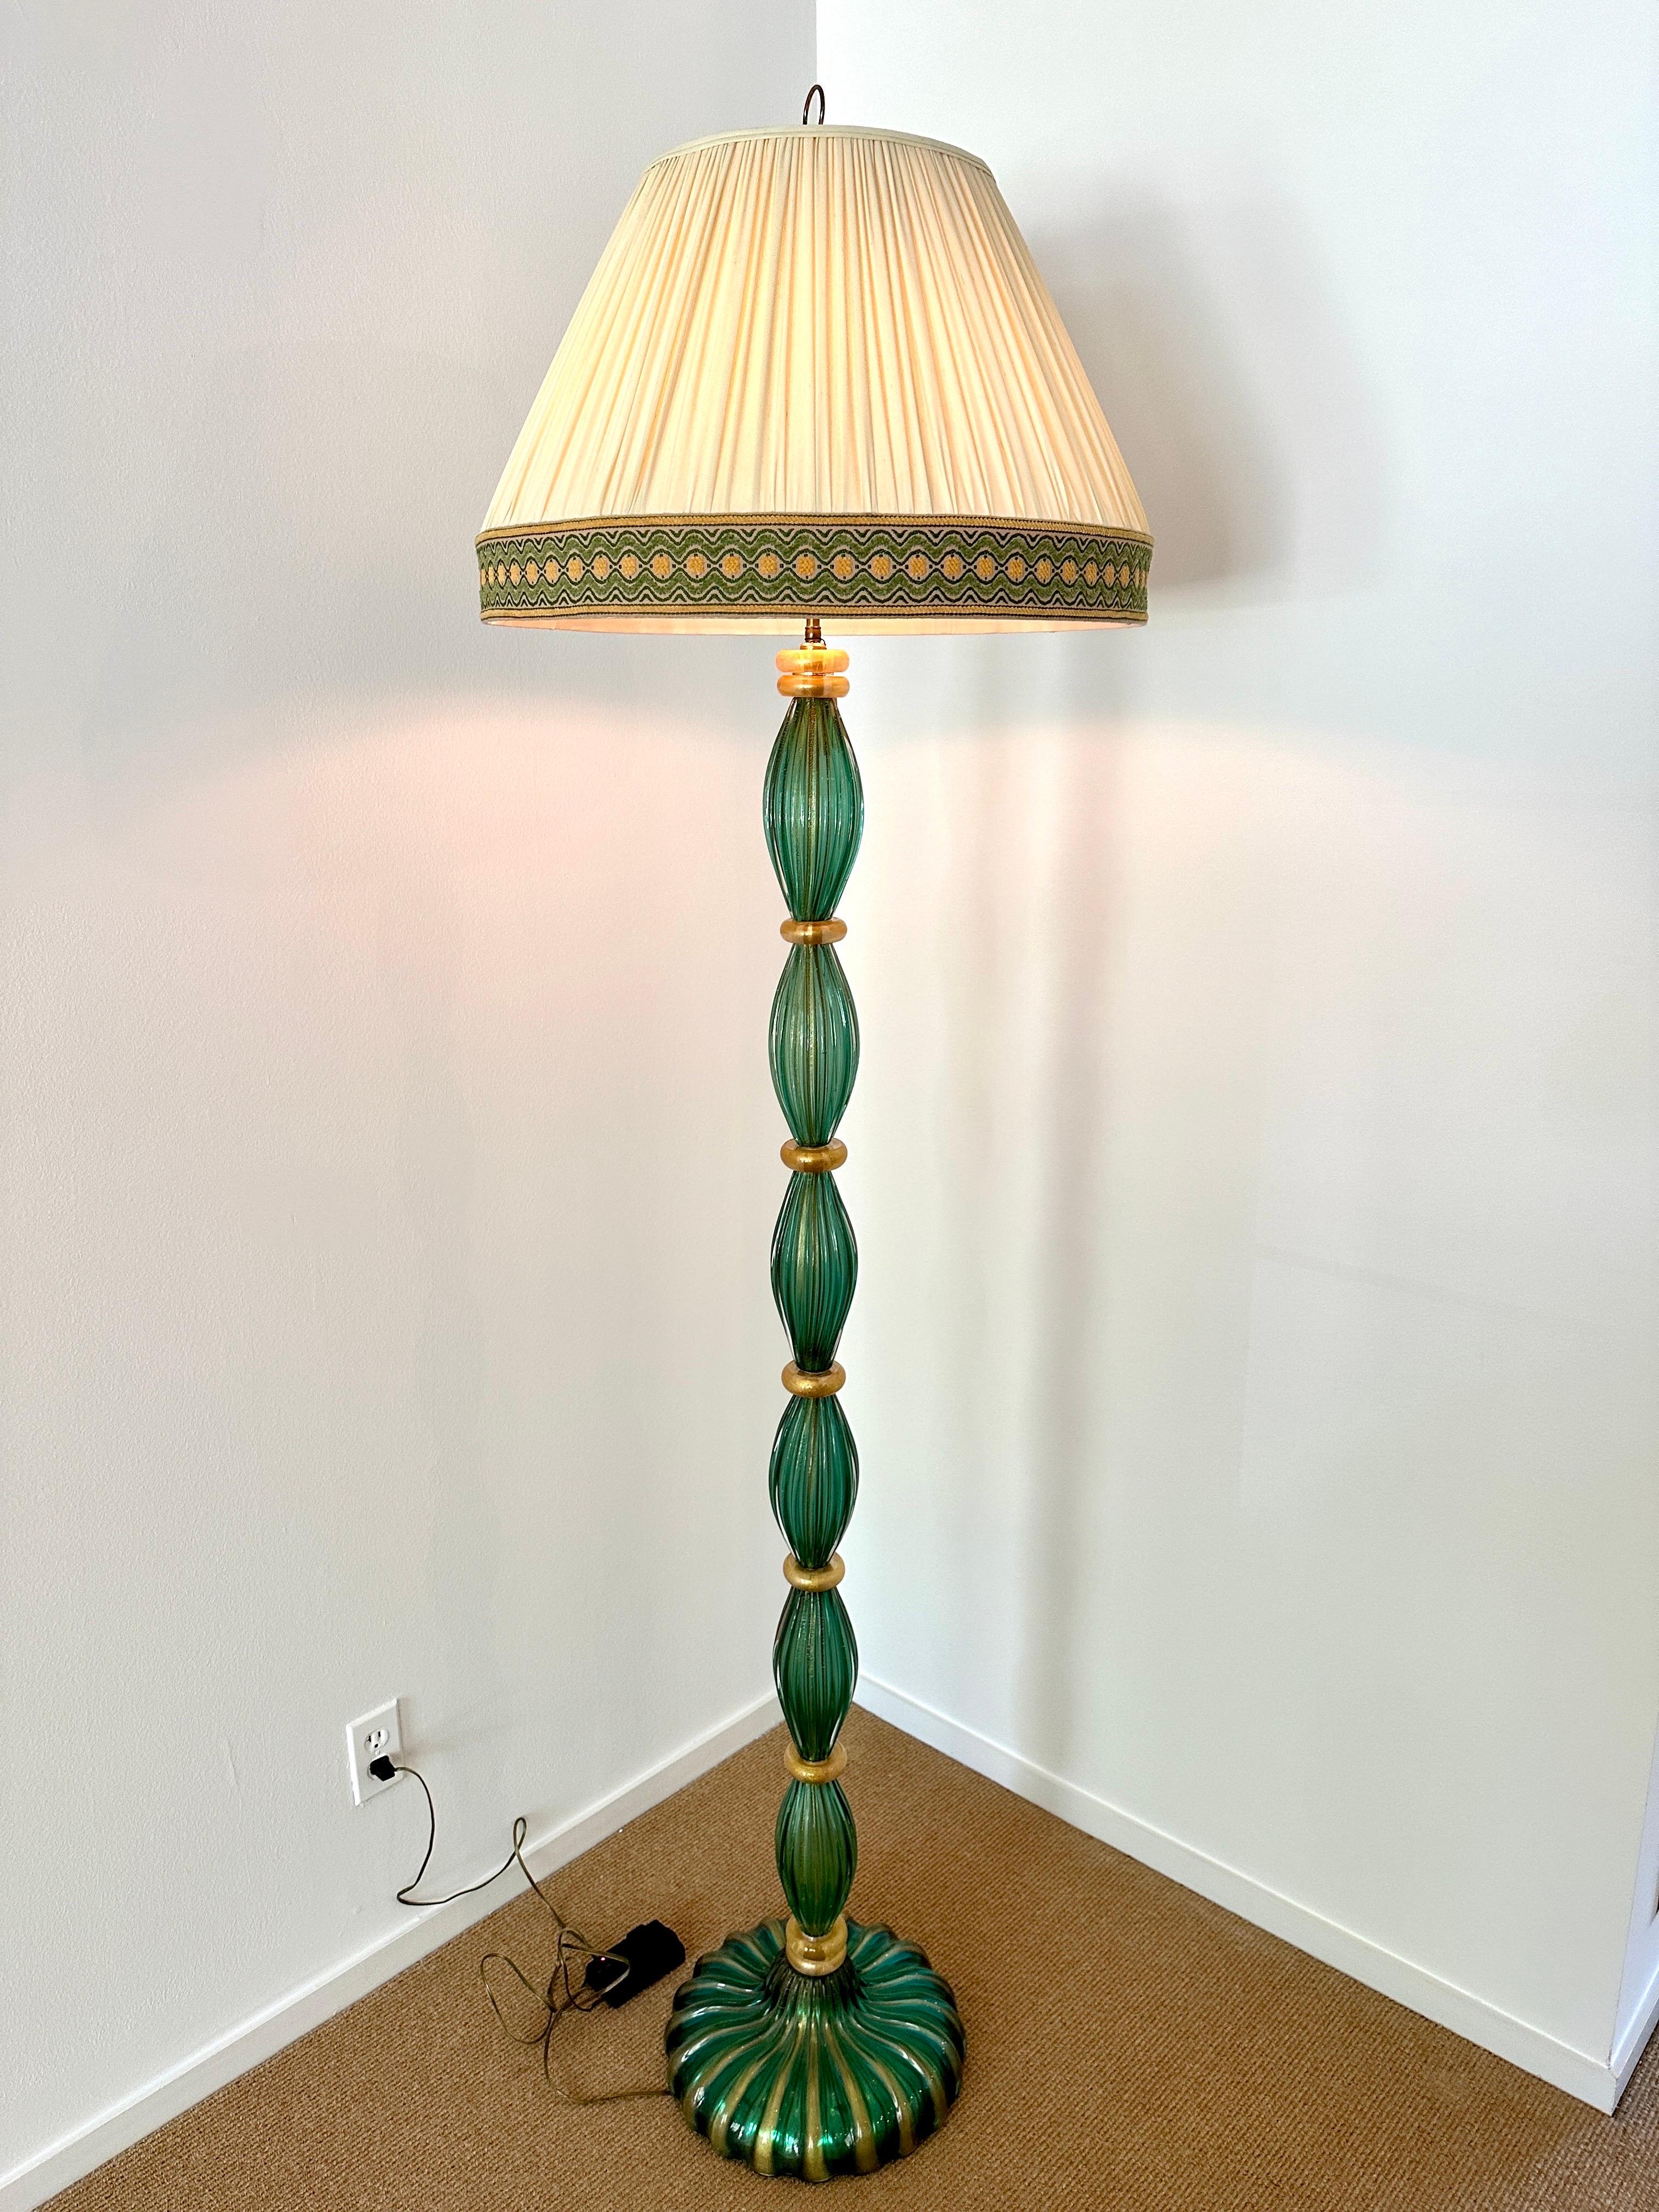 Mid-20th Century Vintage Barovier Green Murano Glass Floor Lamp w/ Gold Foil Inclusions For Sale